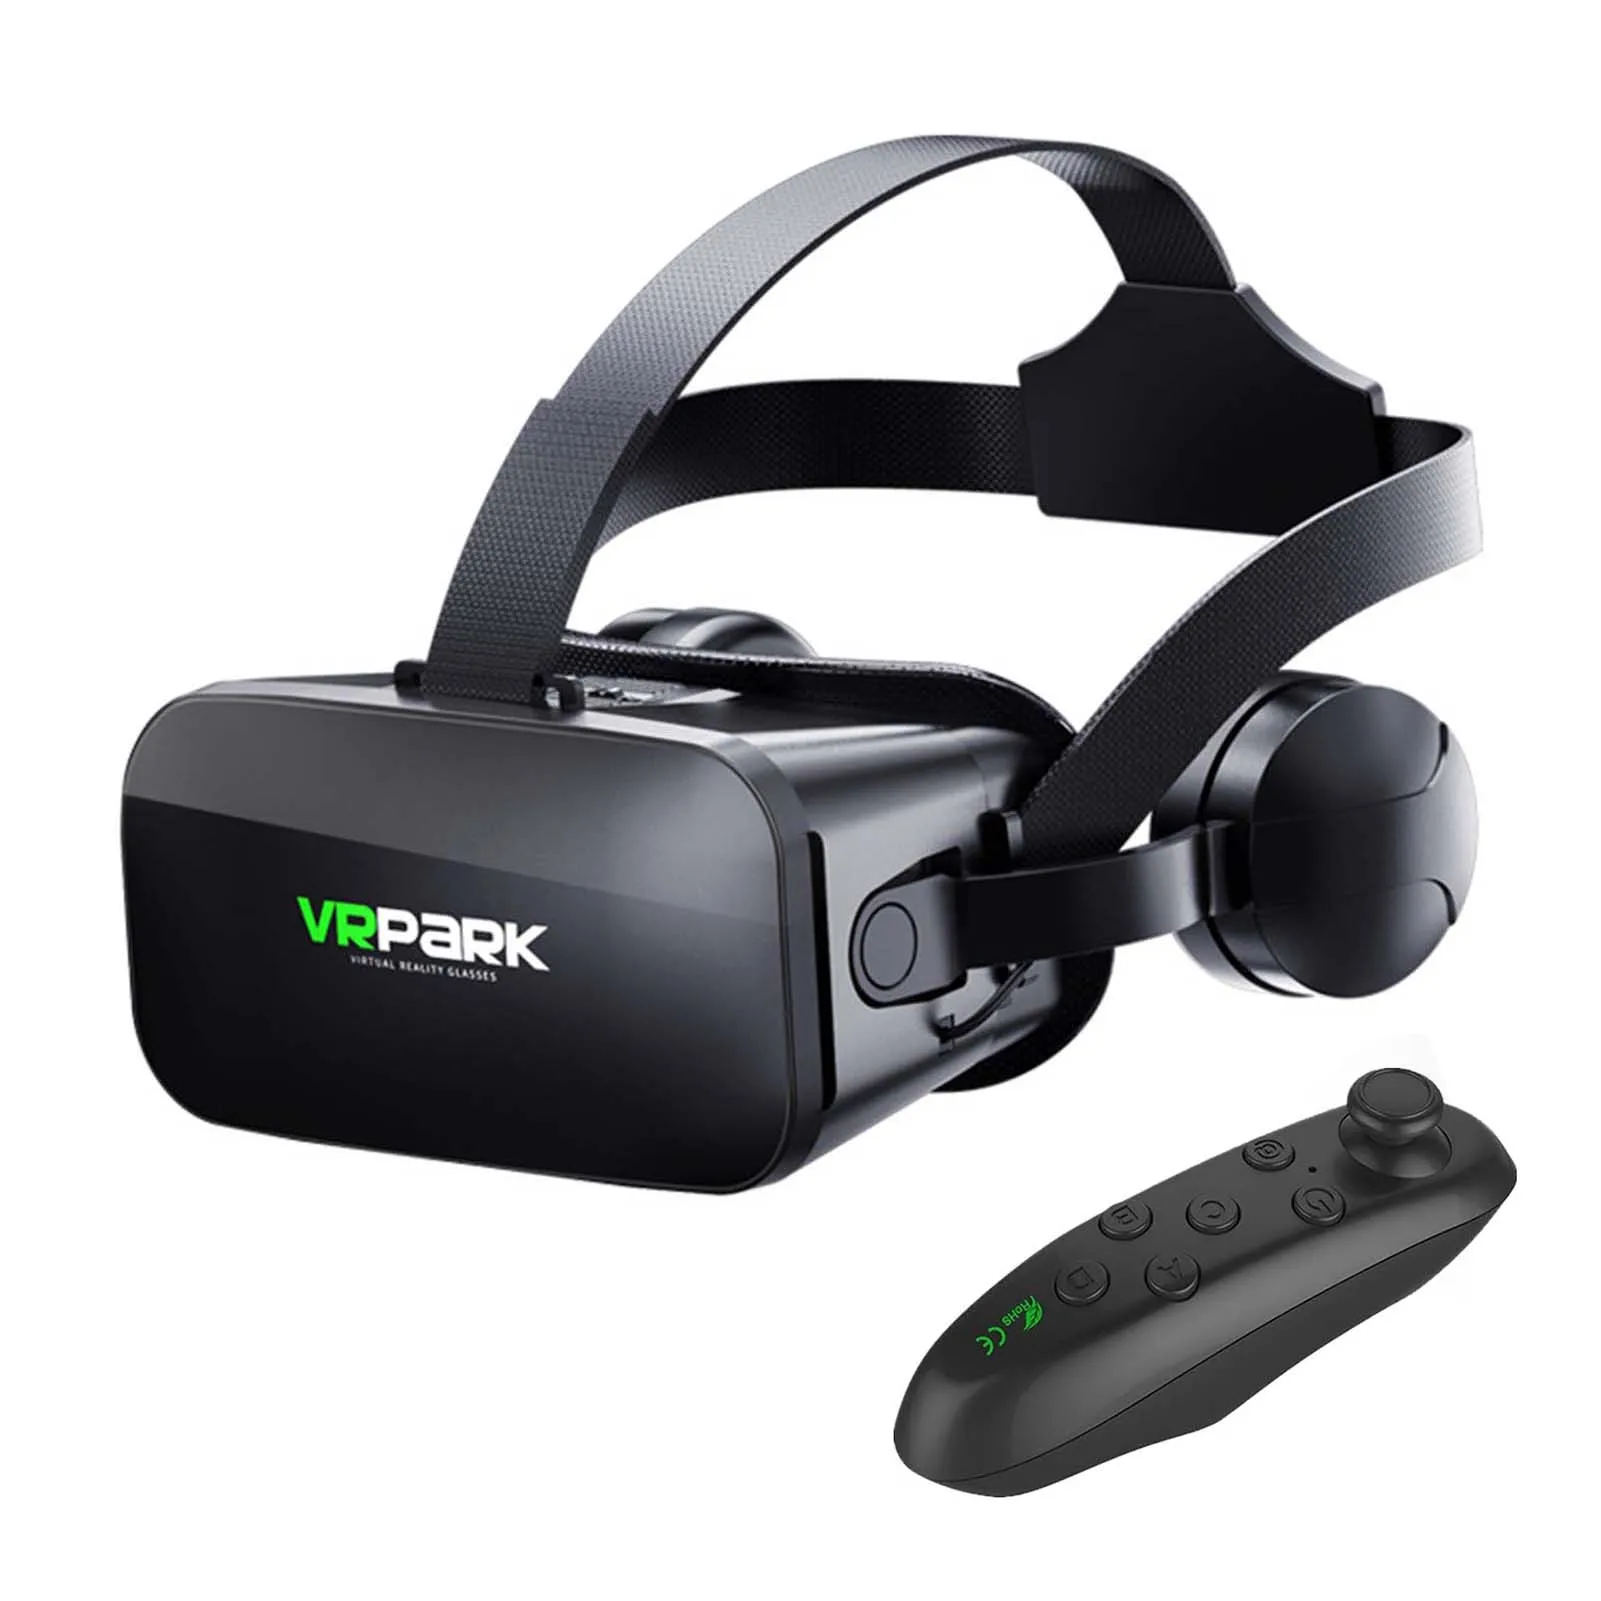 

VR Park VR Glasses Headset 3D Glasses Virtual Reality Glasses VR Headset For IOS Android PC With Wireless Handle Eye Protection